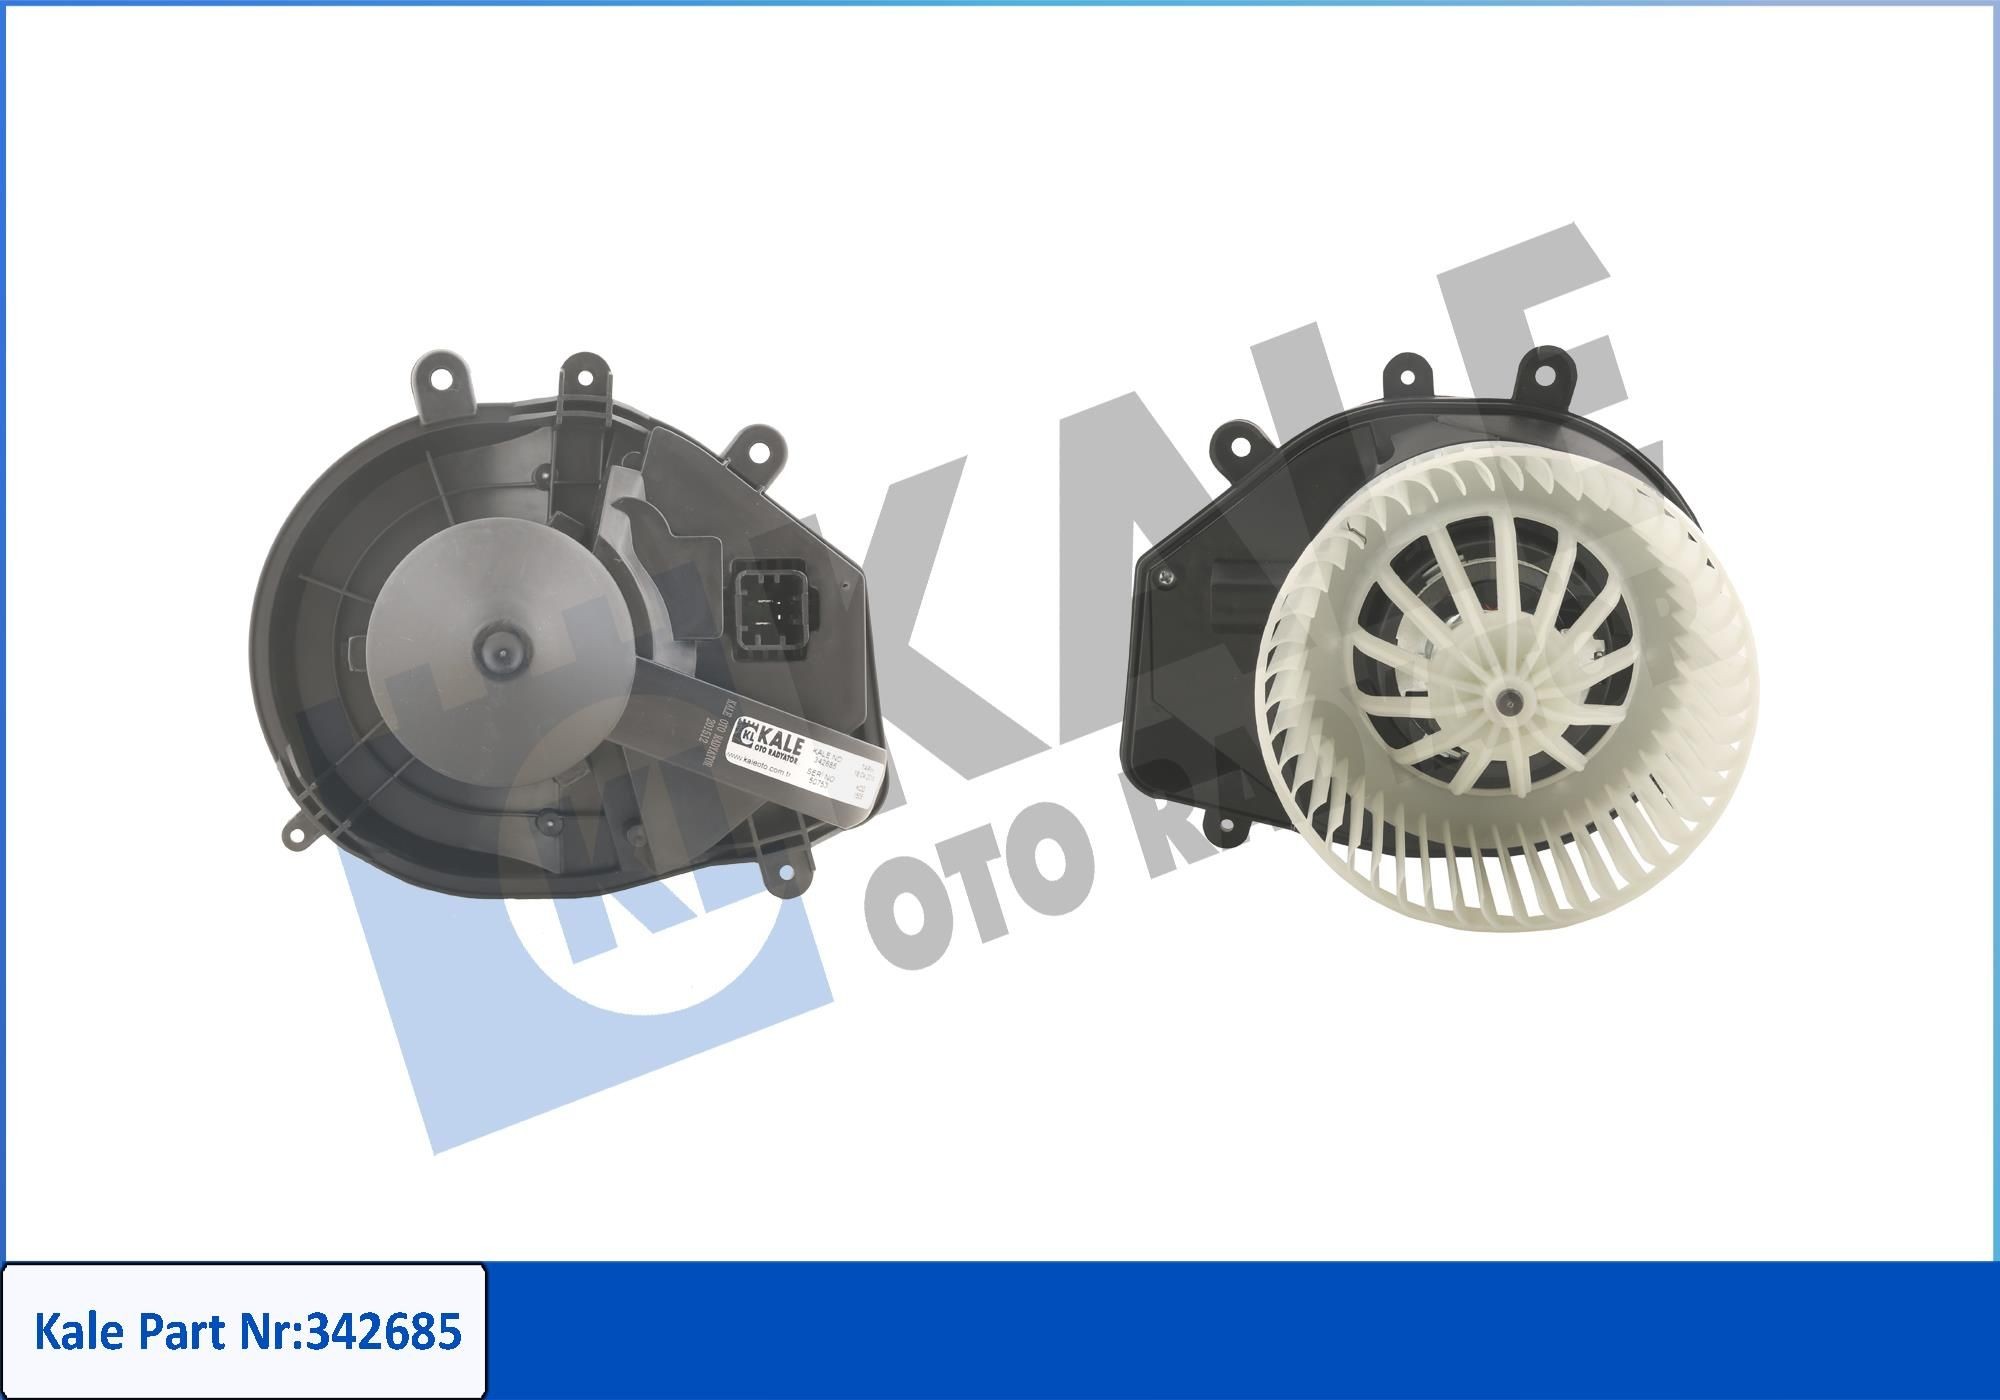 Blower motor KALE OTO RADYATOR for vehicles with air conditioning (manually controlled) - 342685